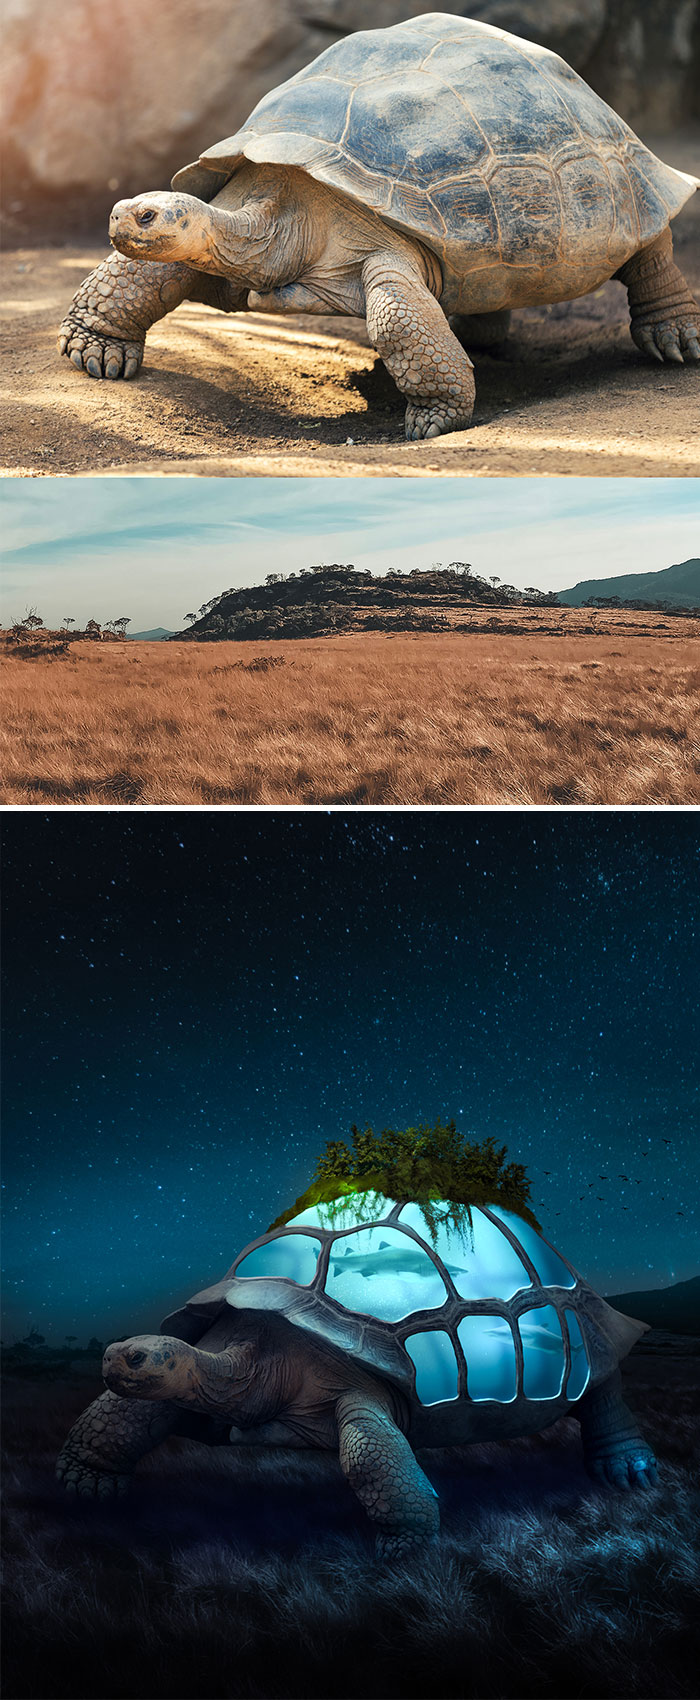 Artist Makes The World Glow In Photoshop